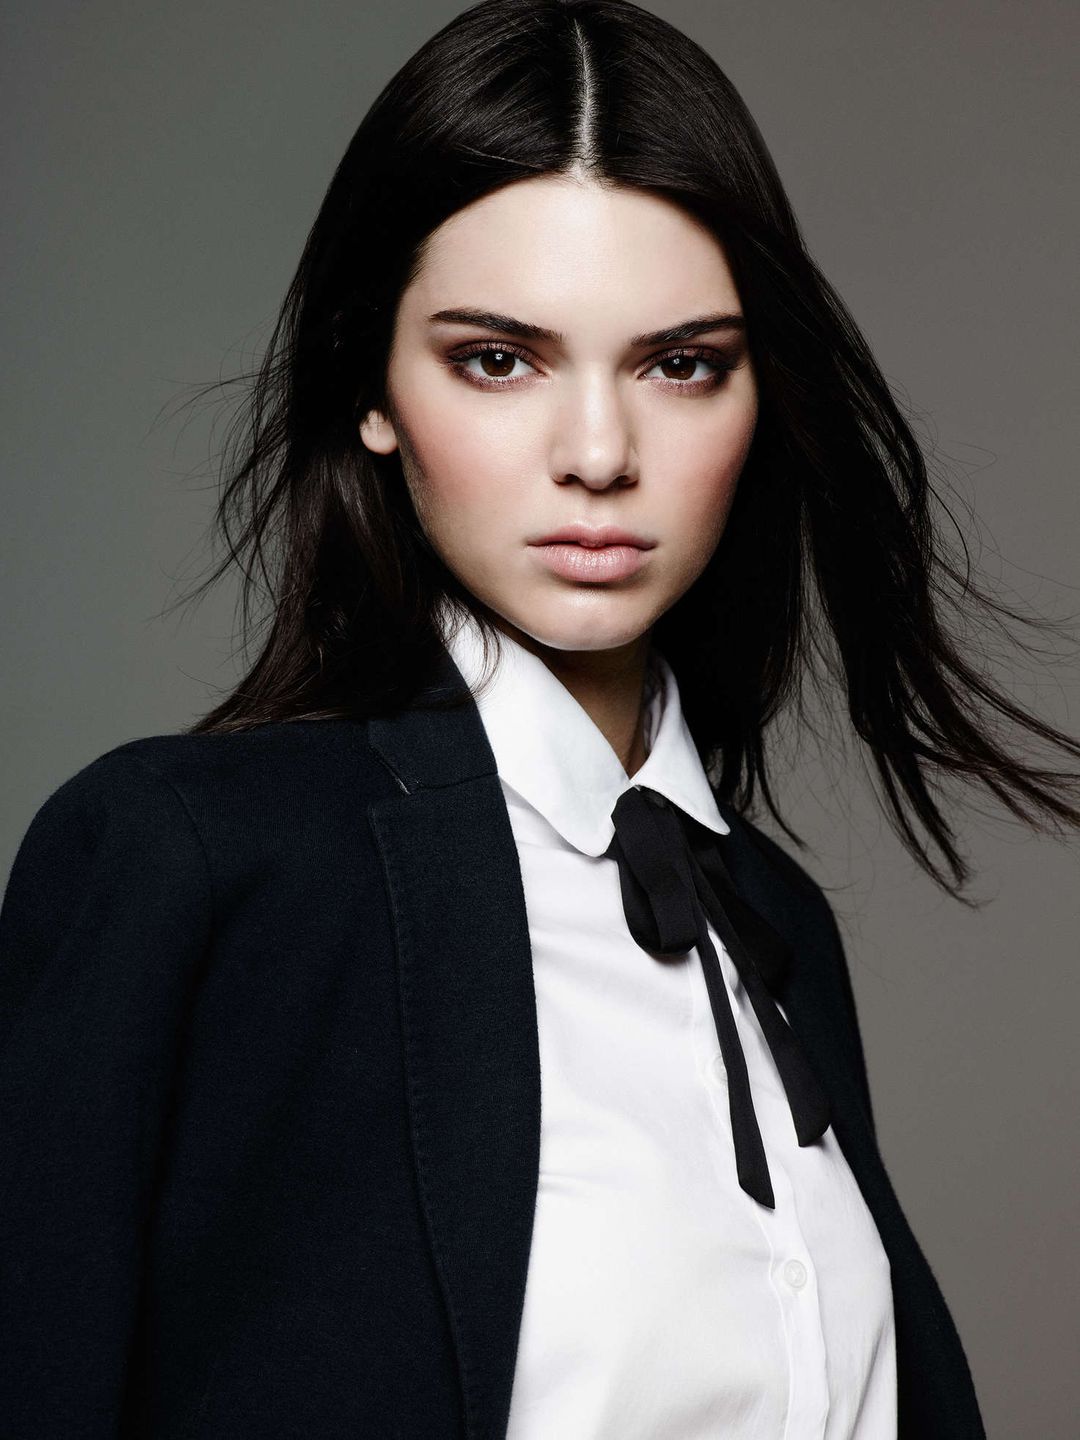 Kendall Jenner date of birth